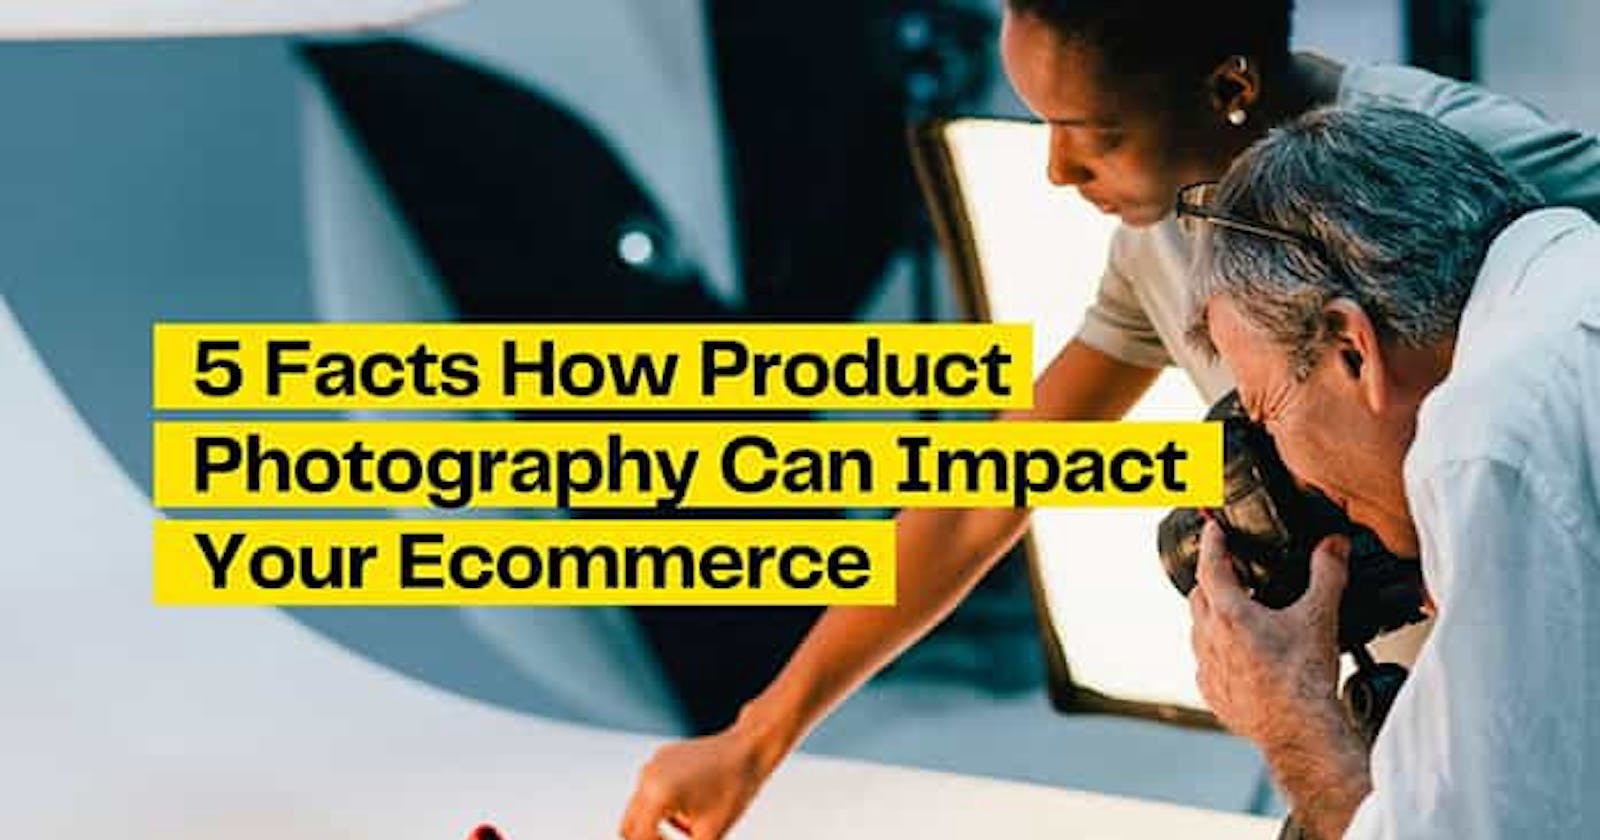 How Product Photography Can Affect Your eCommerce